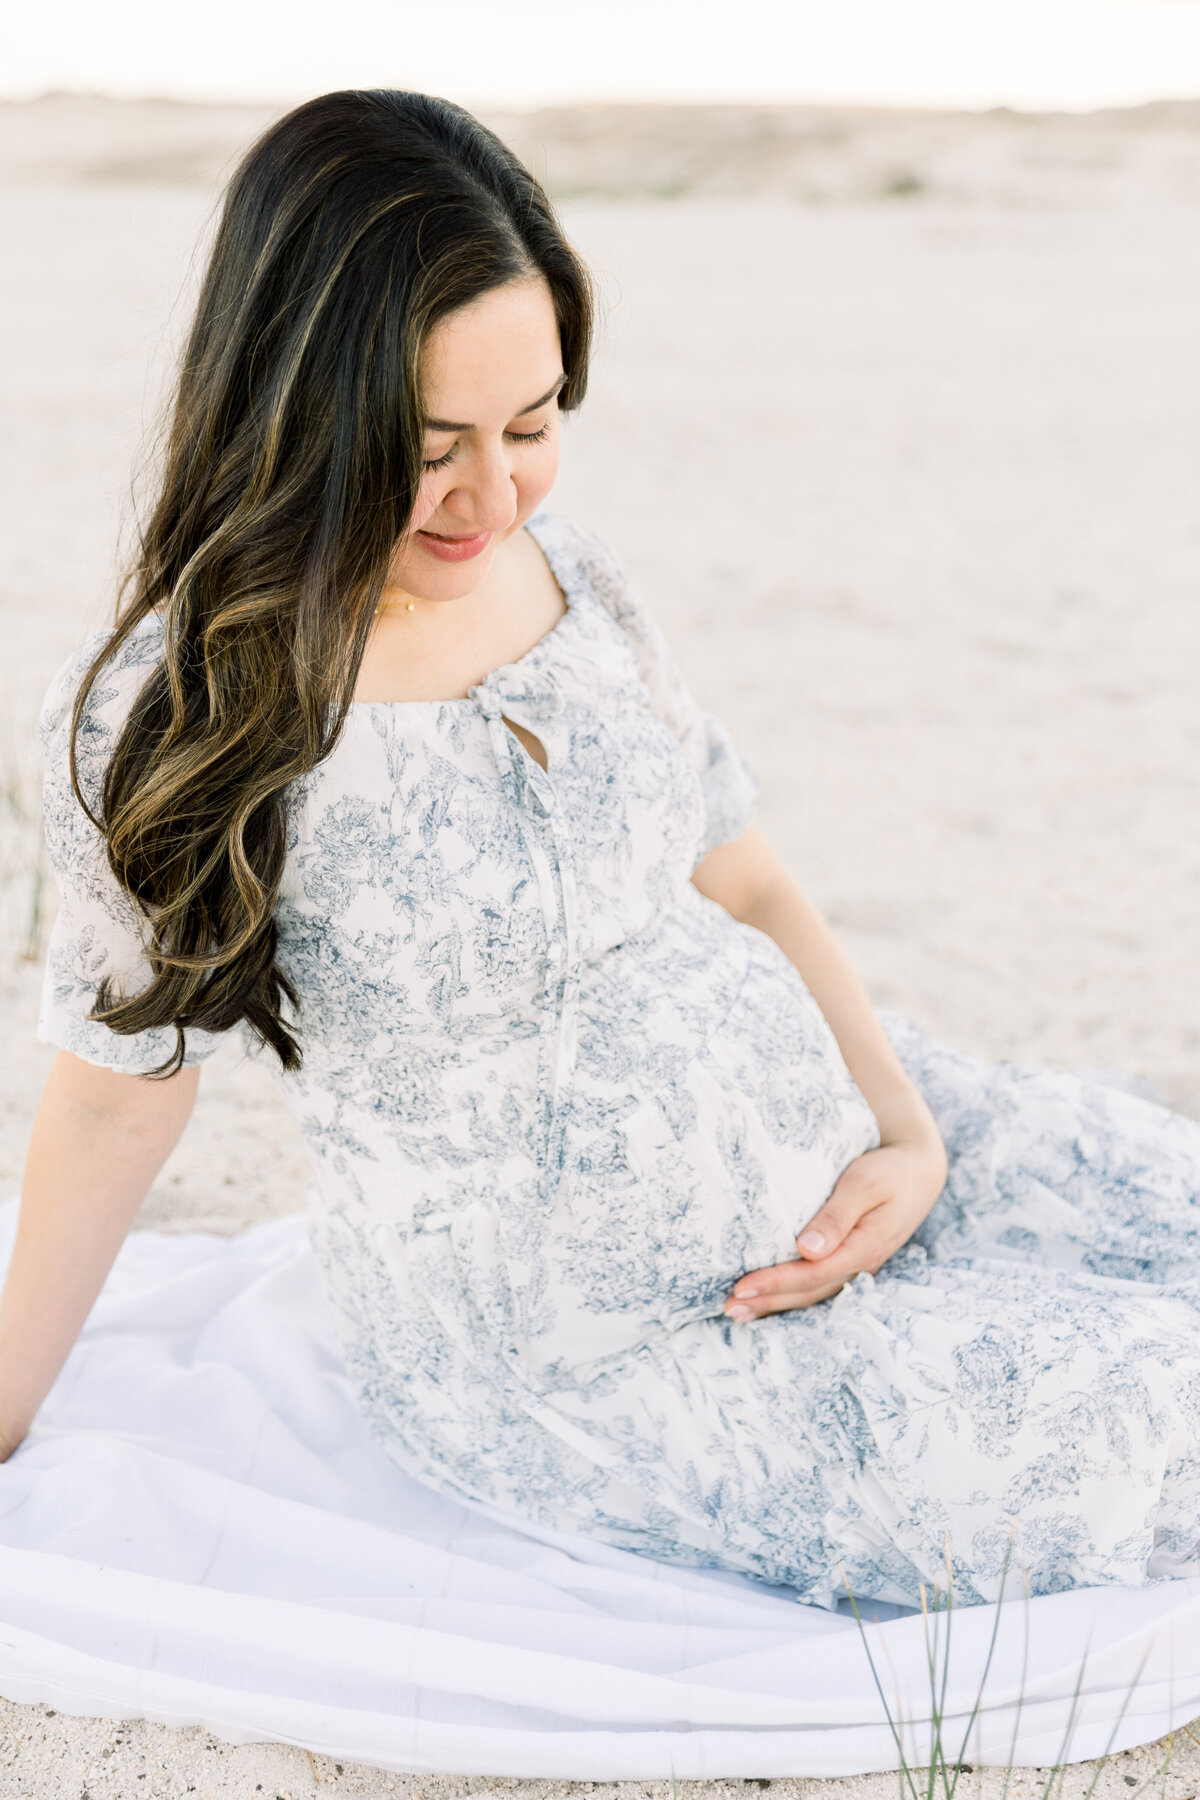 Expecting mother sitting and holding her baby bump taken by Sacramento Maternity Photographer Kelsey Krall